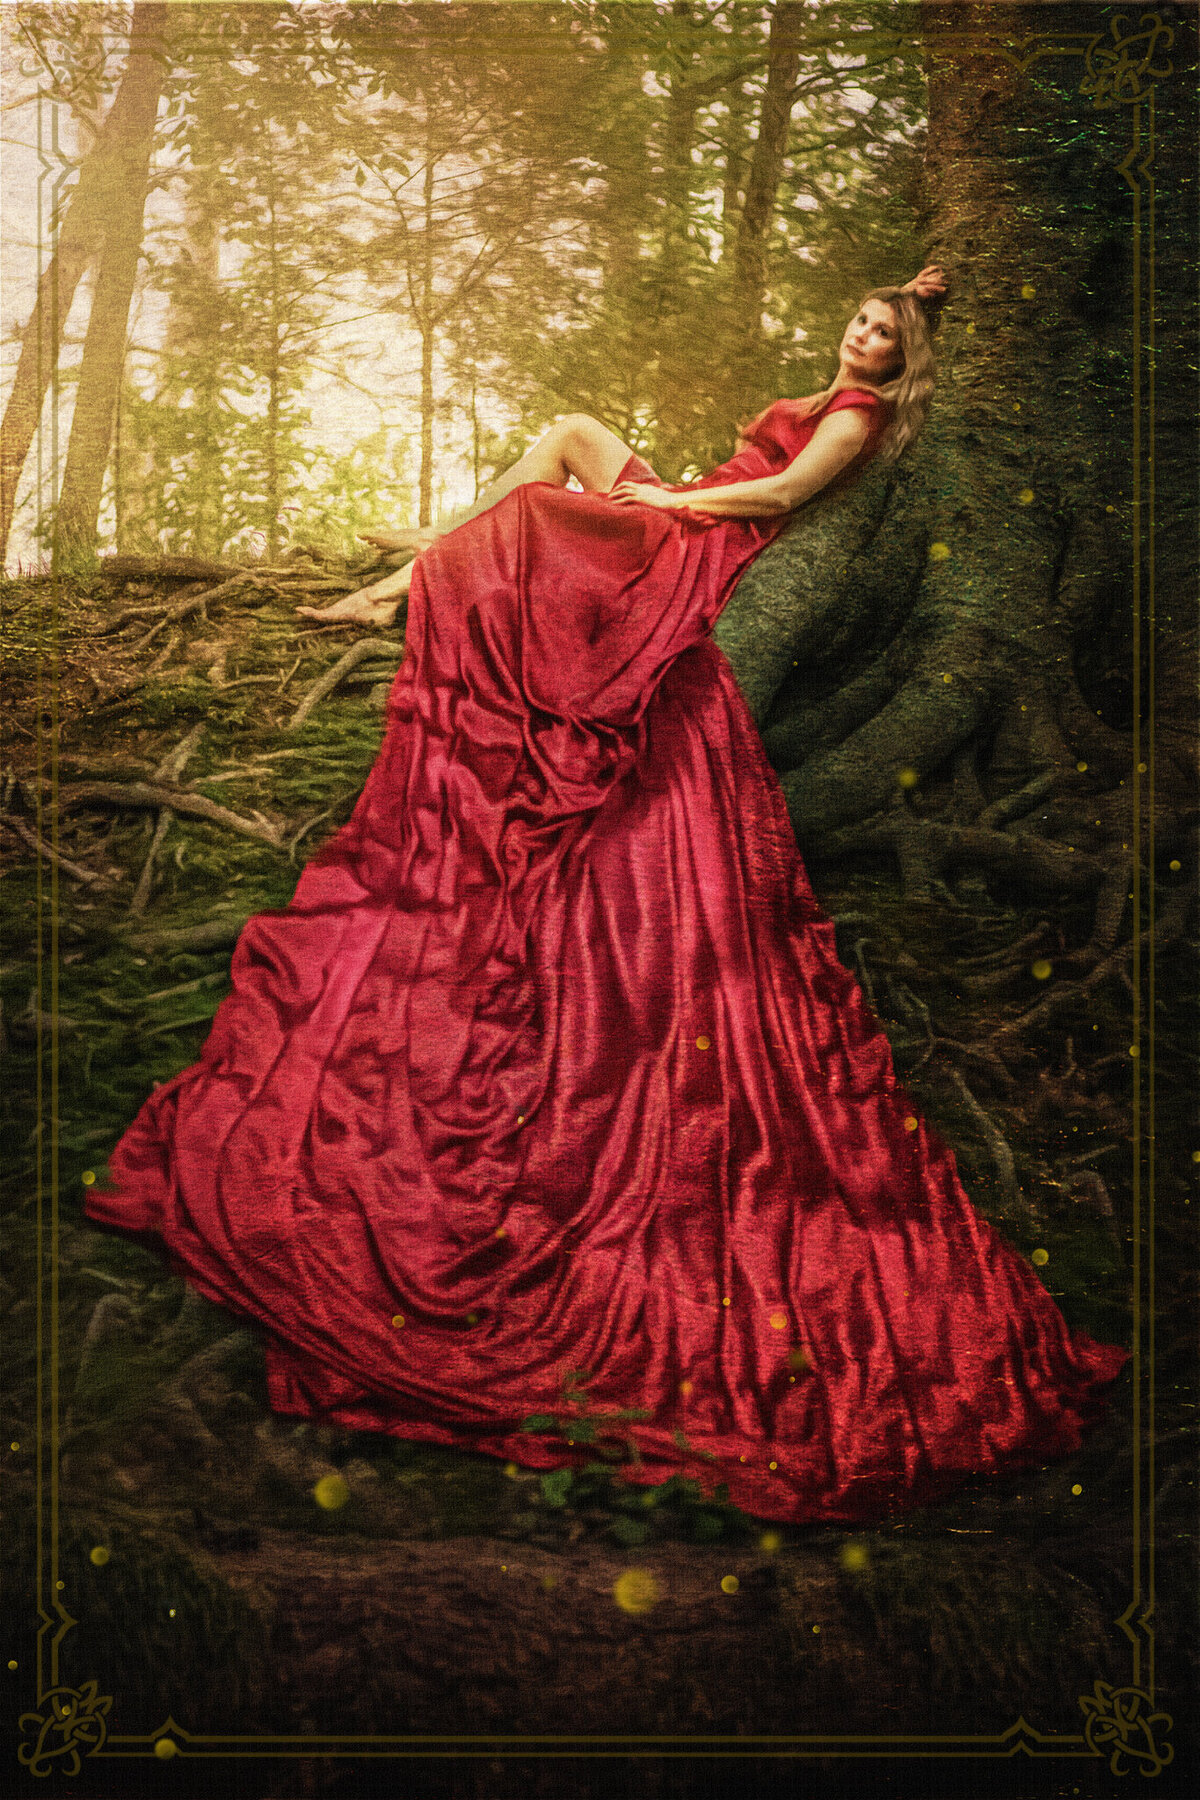 Fairy tale like portrait of a woman in a long trained red dress looks like a painting.